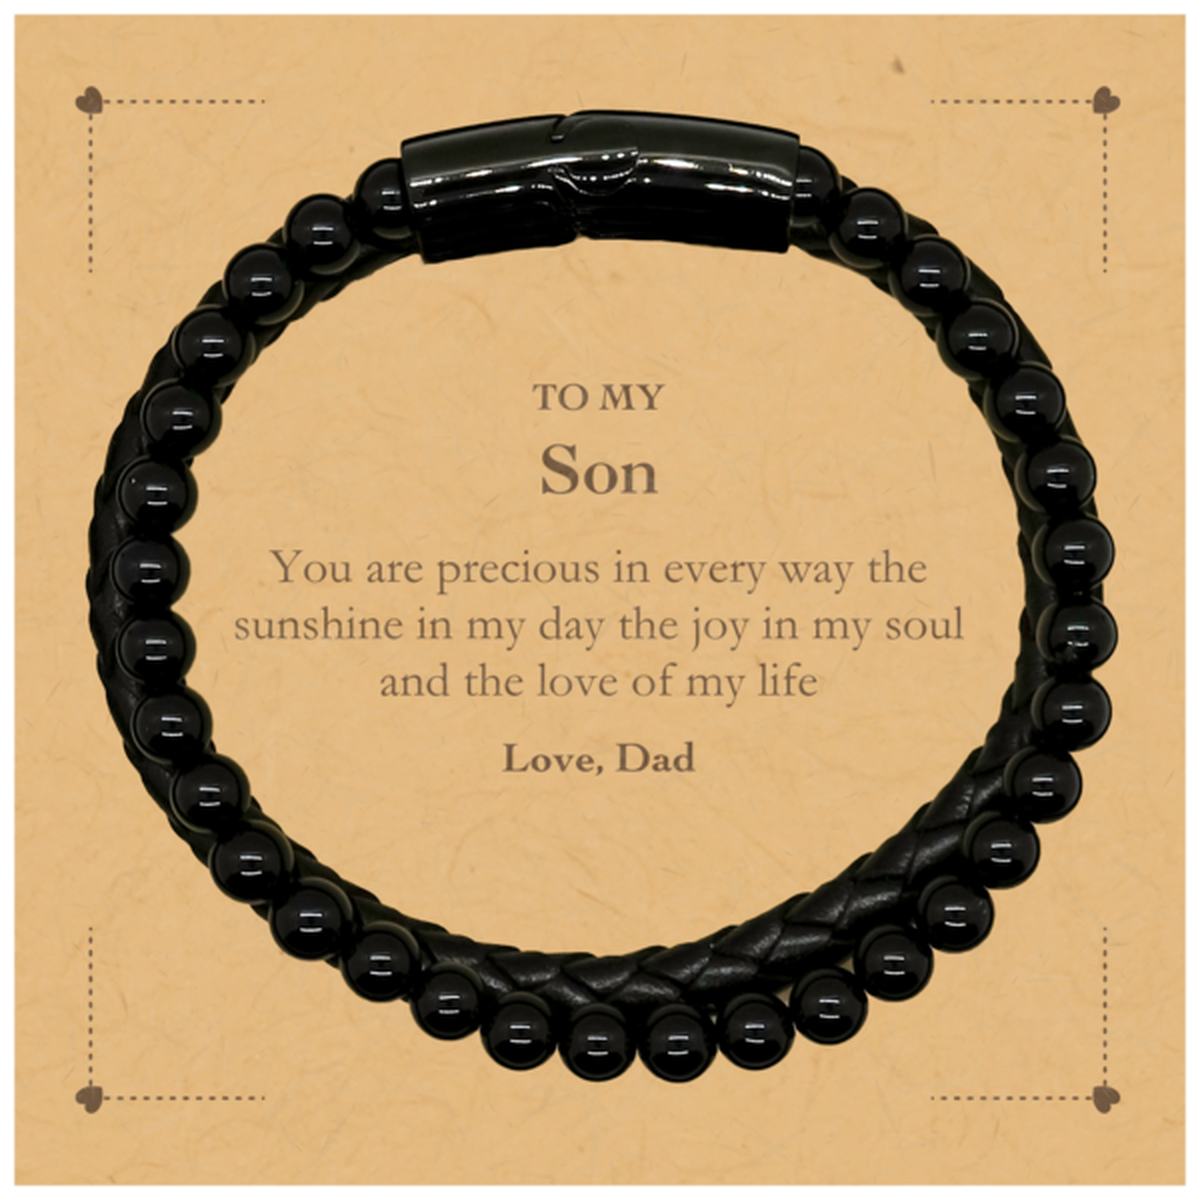 Graduation Gifts for Son Stone Leather Bracelets Present from Dad, Christmas Son Birthday Gifts Son You are precious in every way the sunshine in my day. Love, Dad